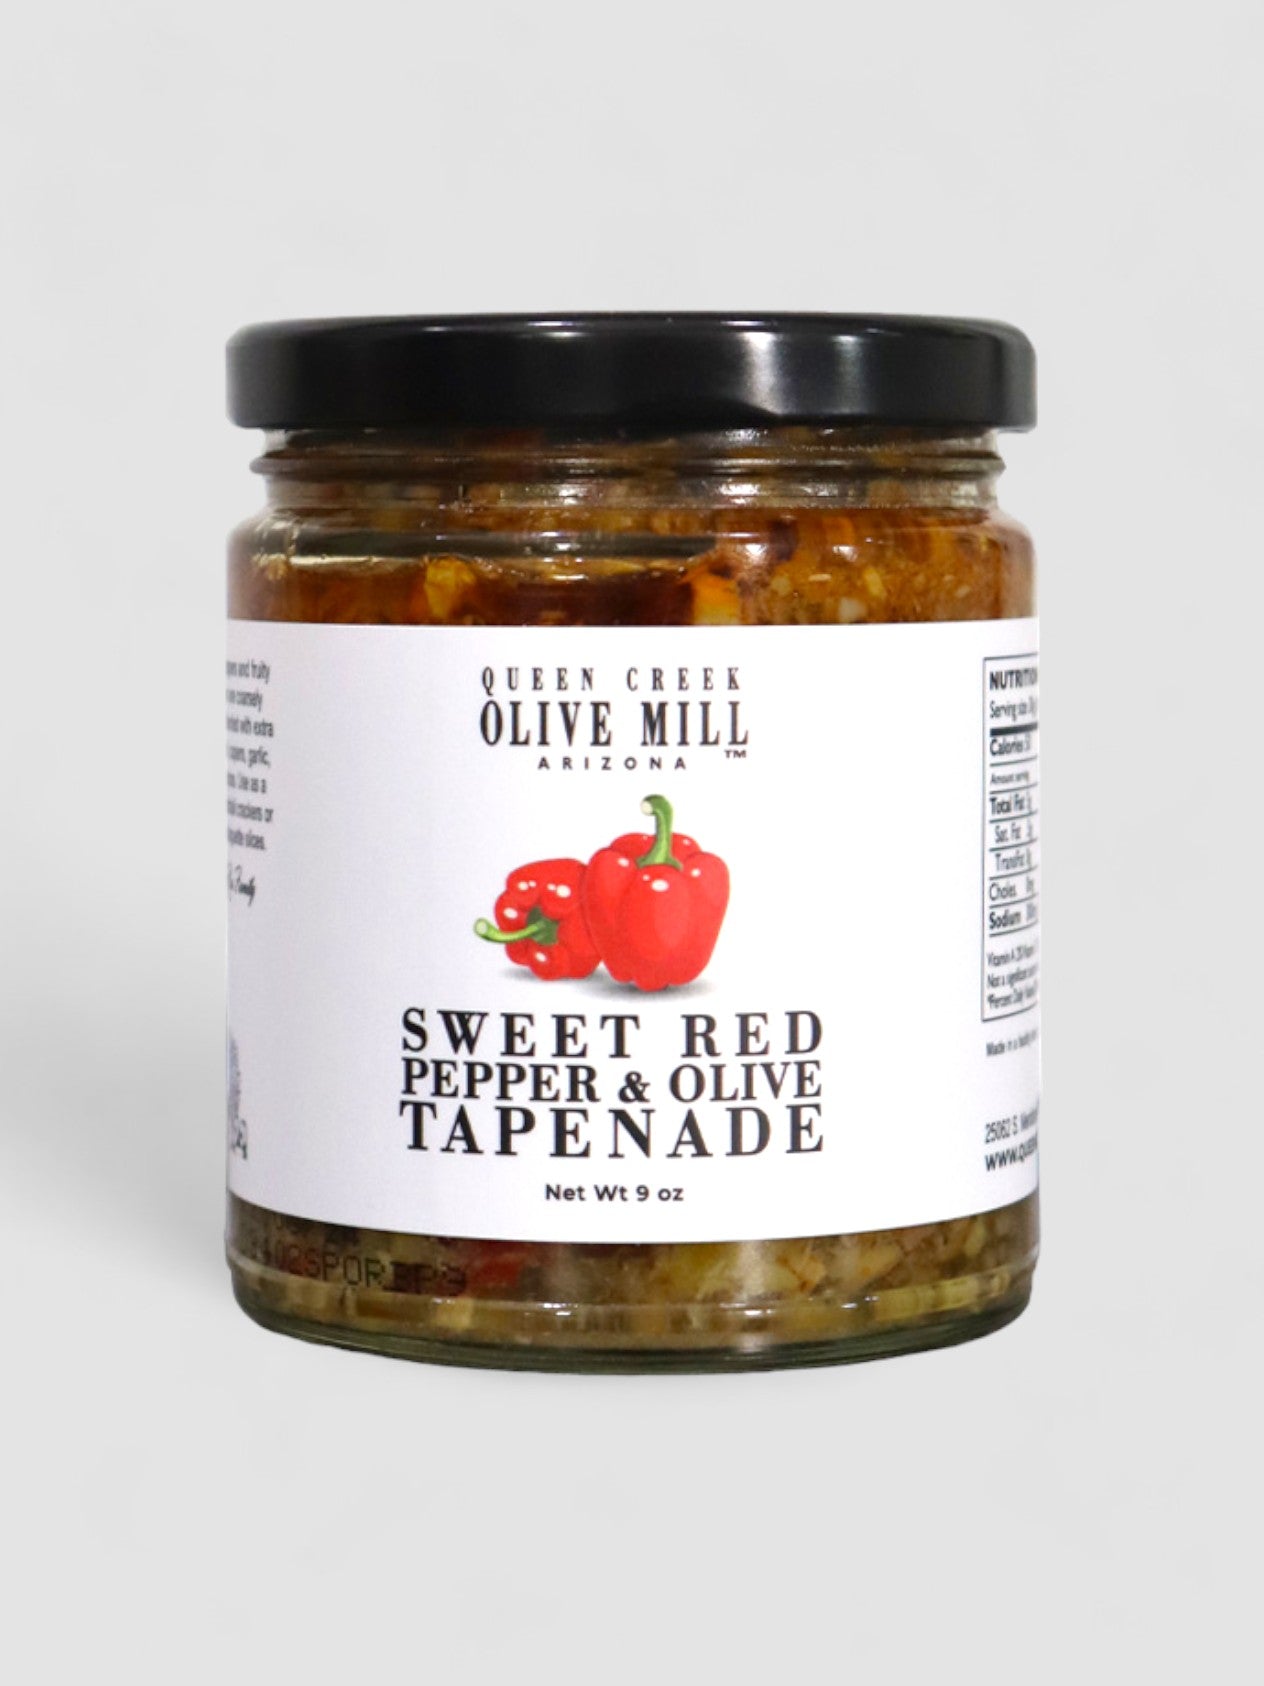 SWEET RED PEPPER & OLIVE TAPENADE